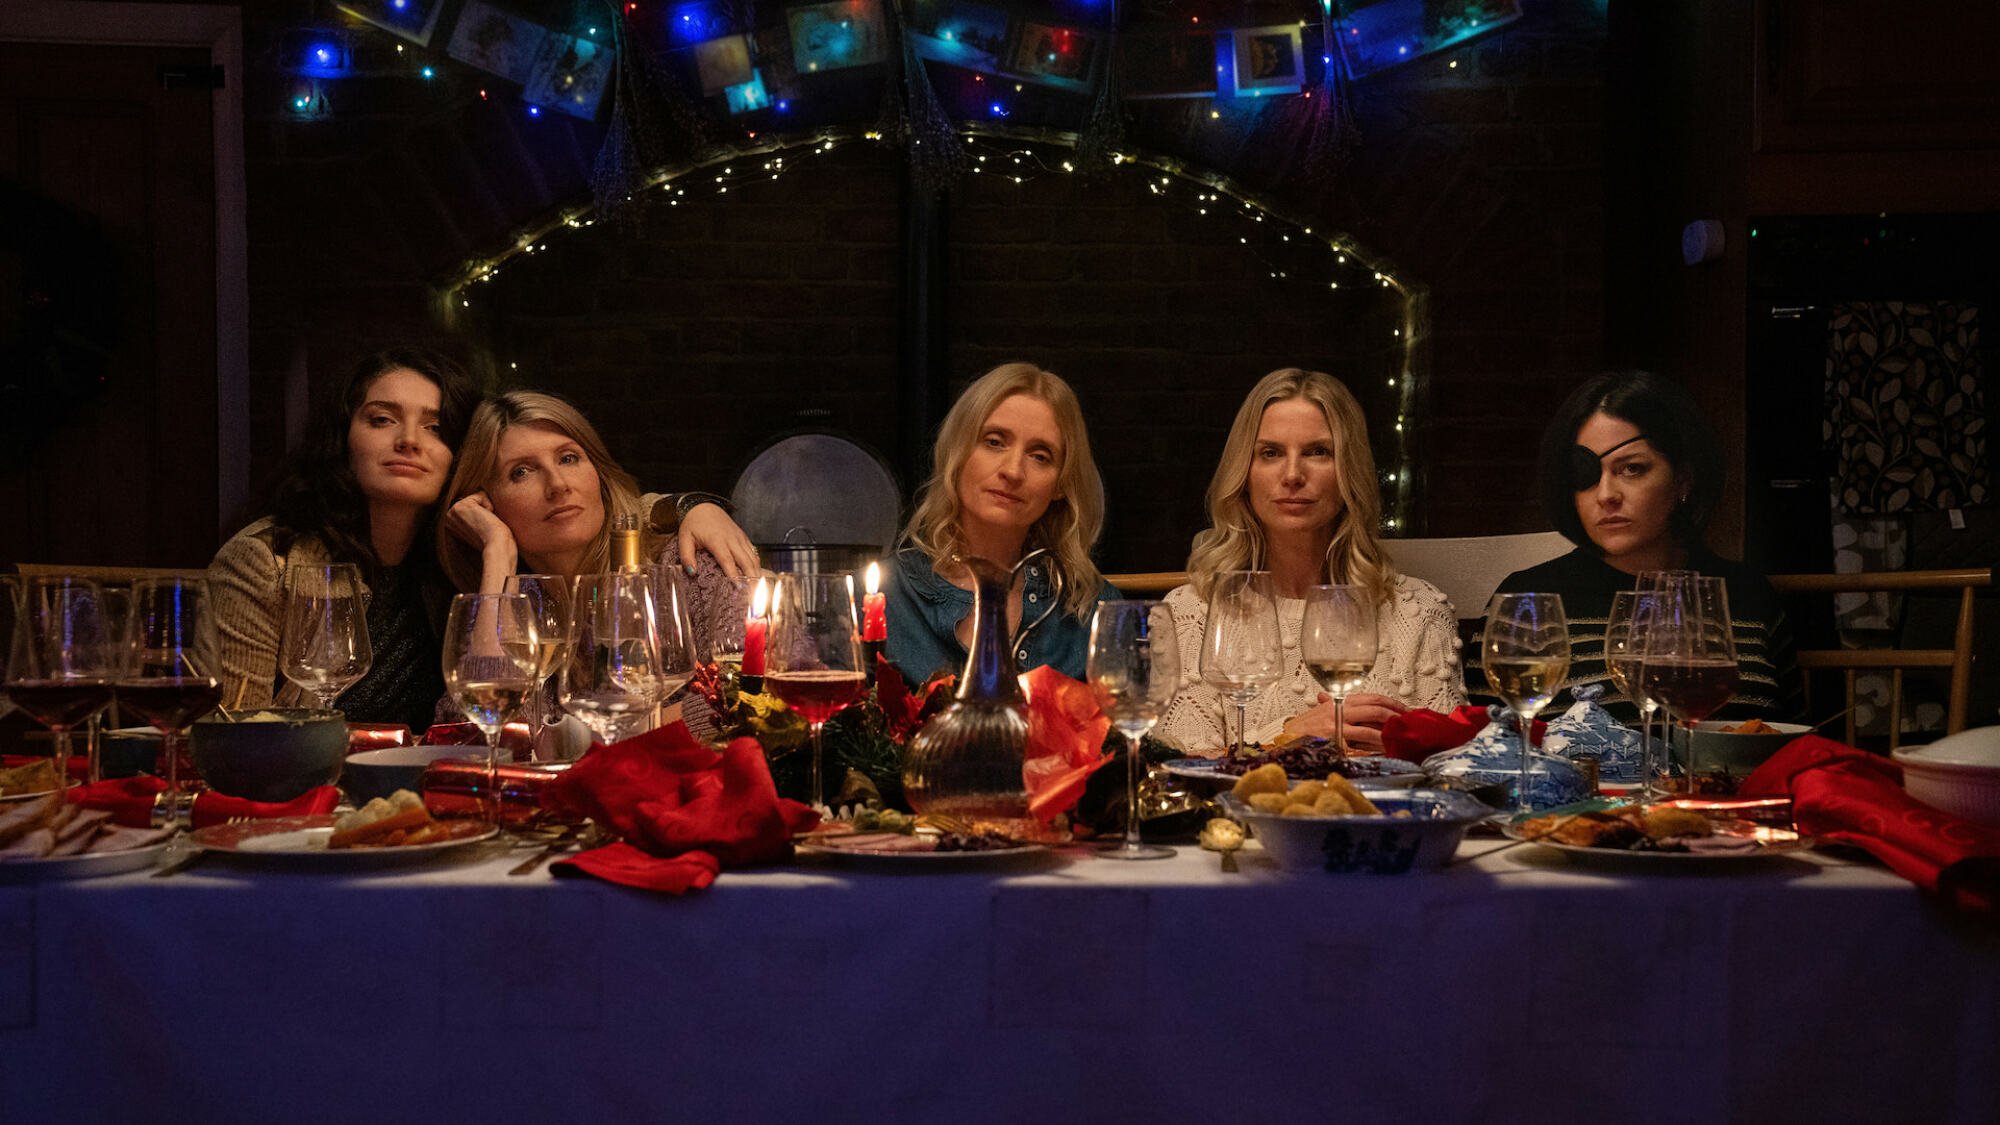 Five woman sit at a festive dining table looking at the camera blankly.